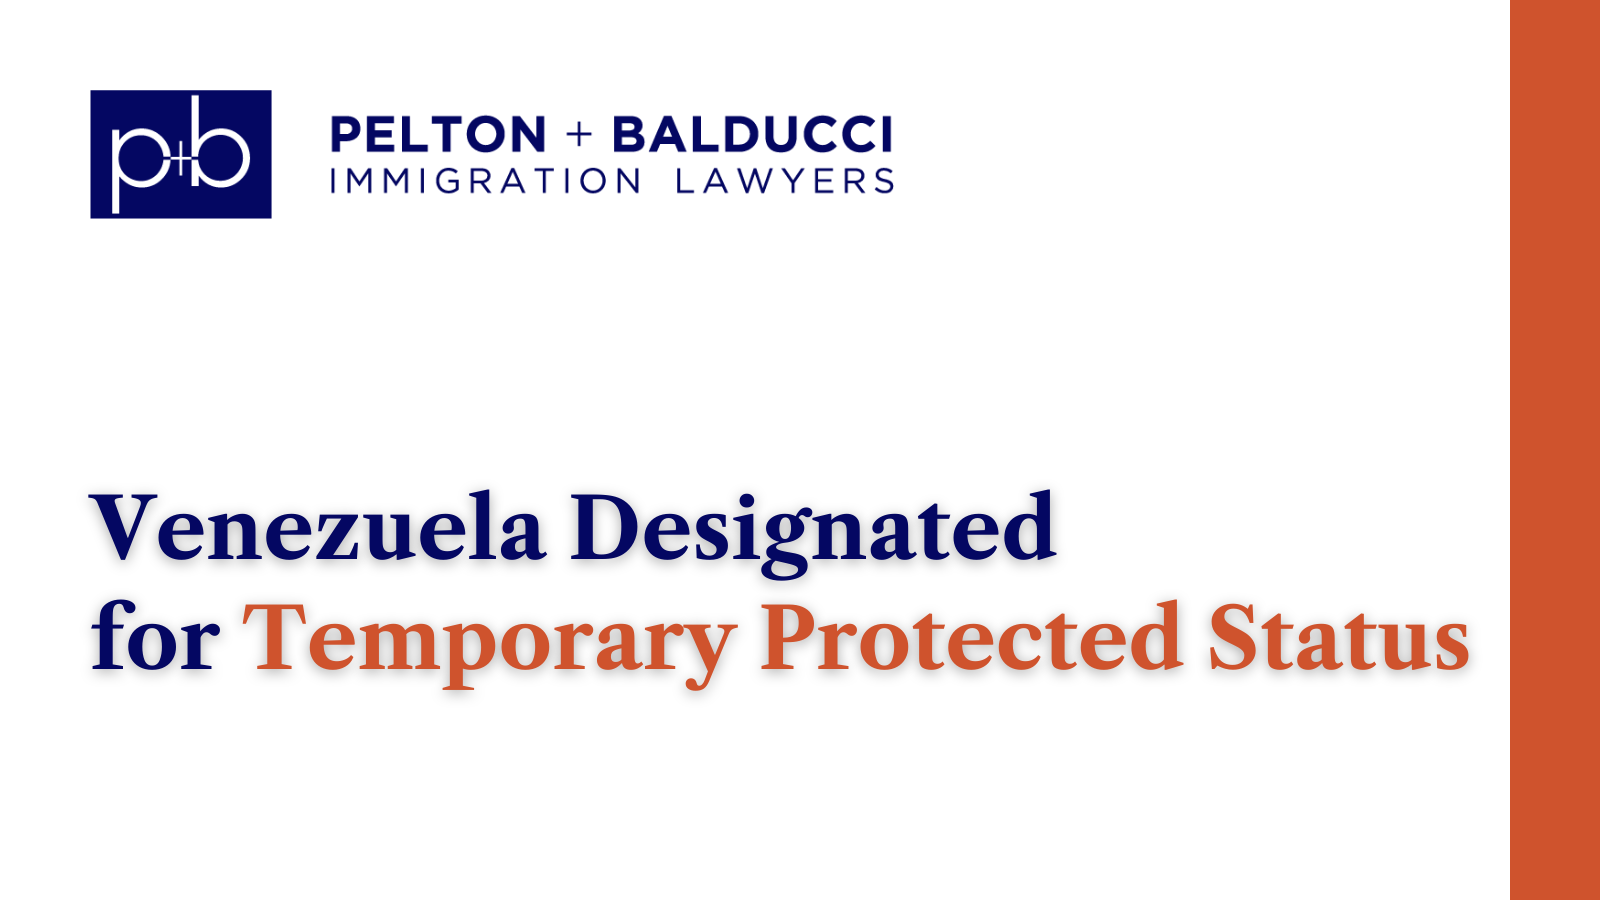 Venezuela Designated for Temporary Protected Status - New Orleans Immigration Lawyers - Pelton Balducci